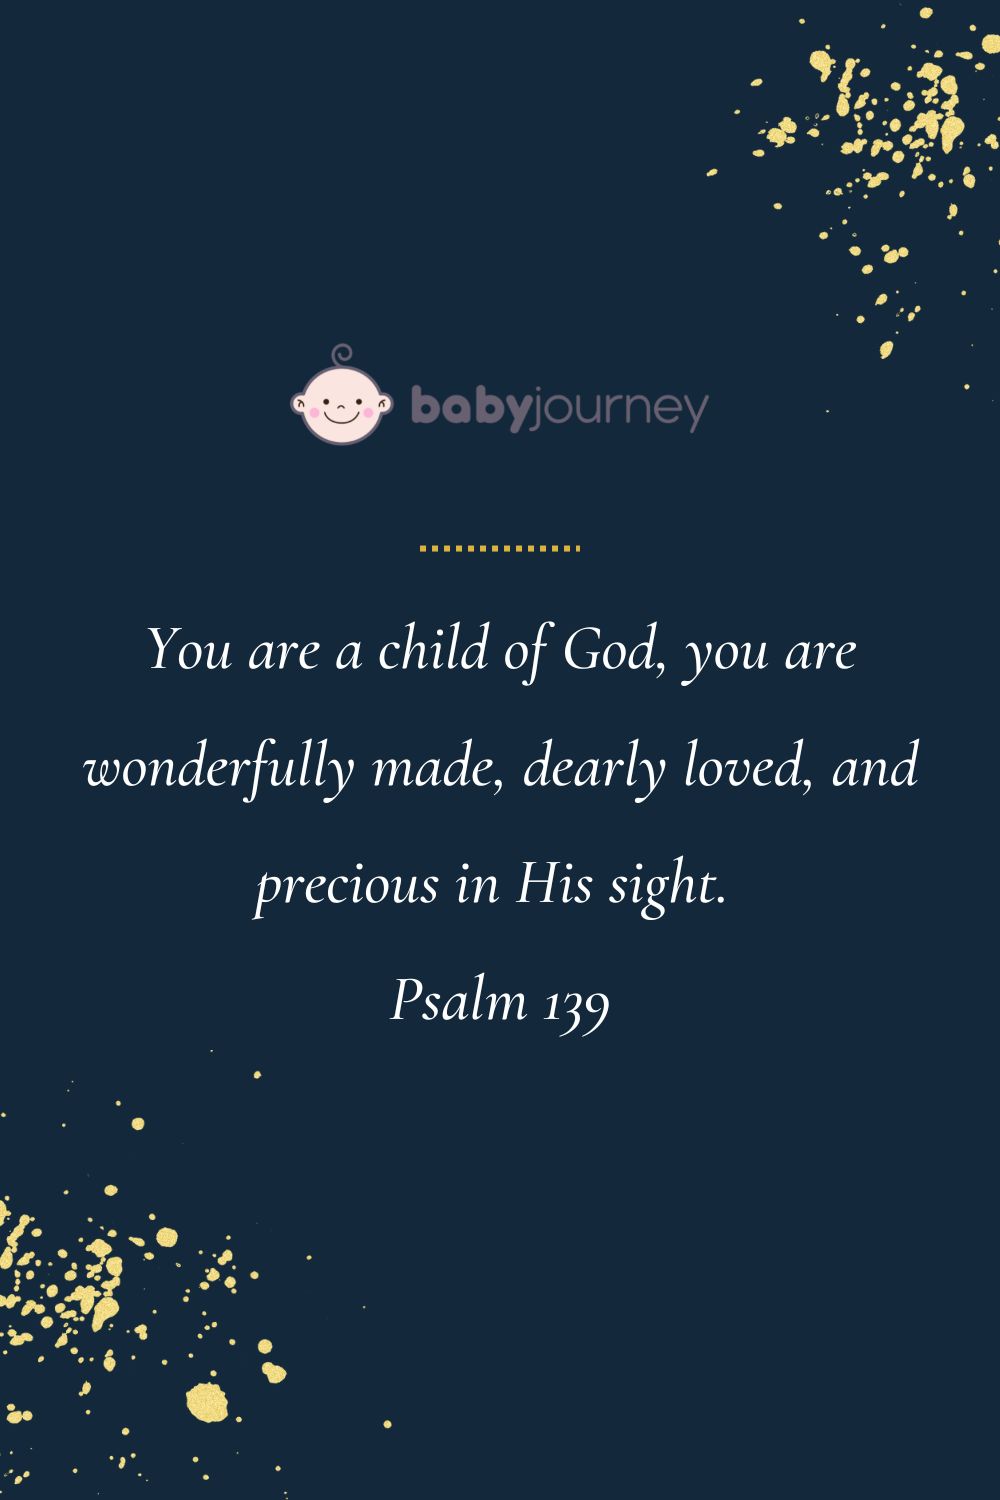 You are a child of God, you are wonderfully made, dearly loved, and precious in His sight. Psalm 139 - Bible baptism quotes - Baby Journey